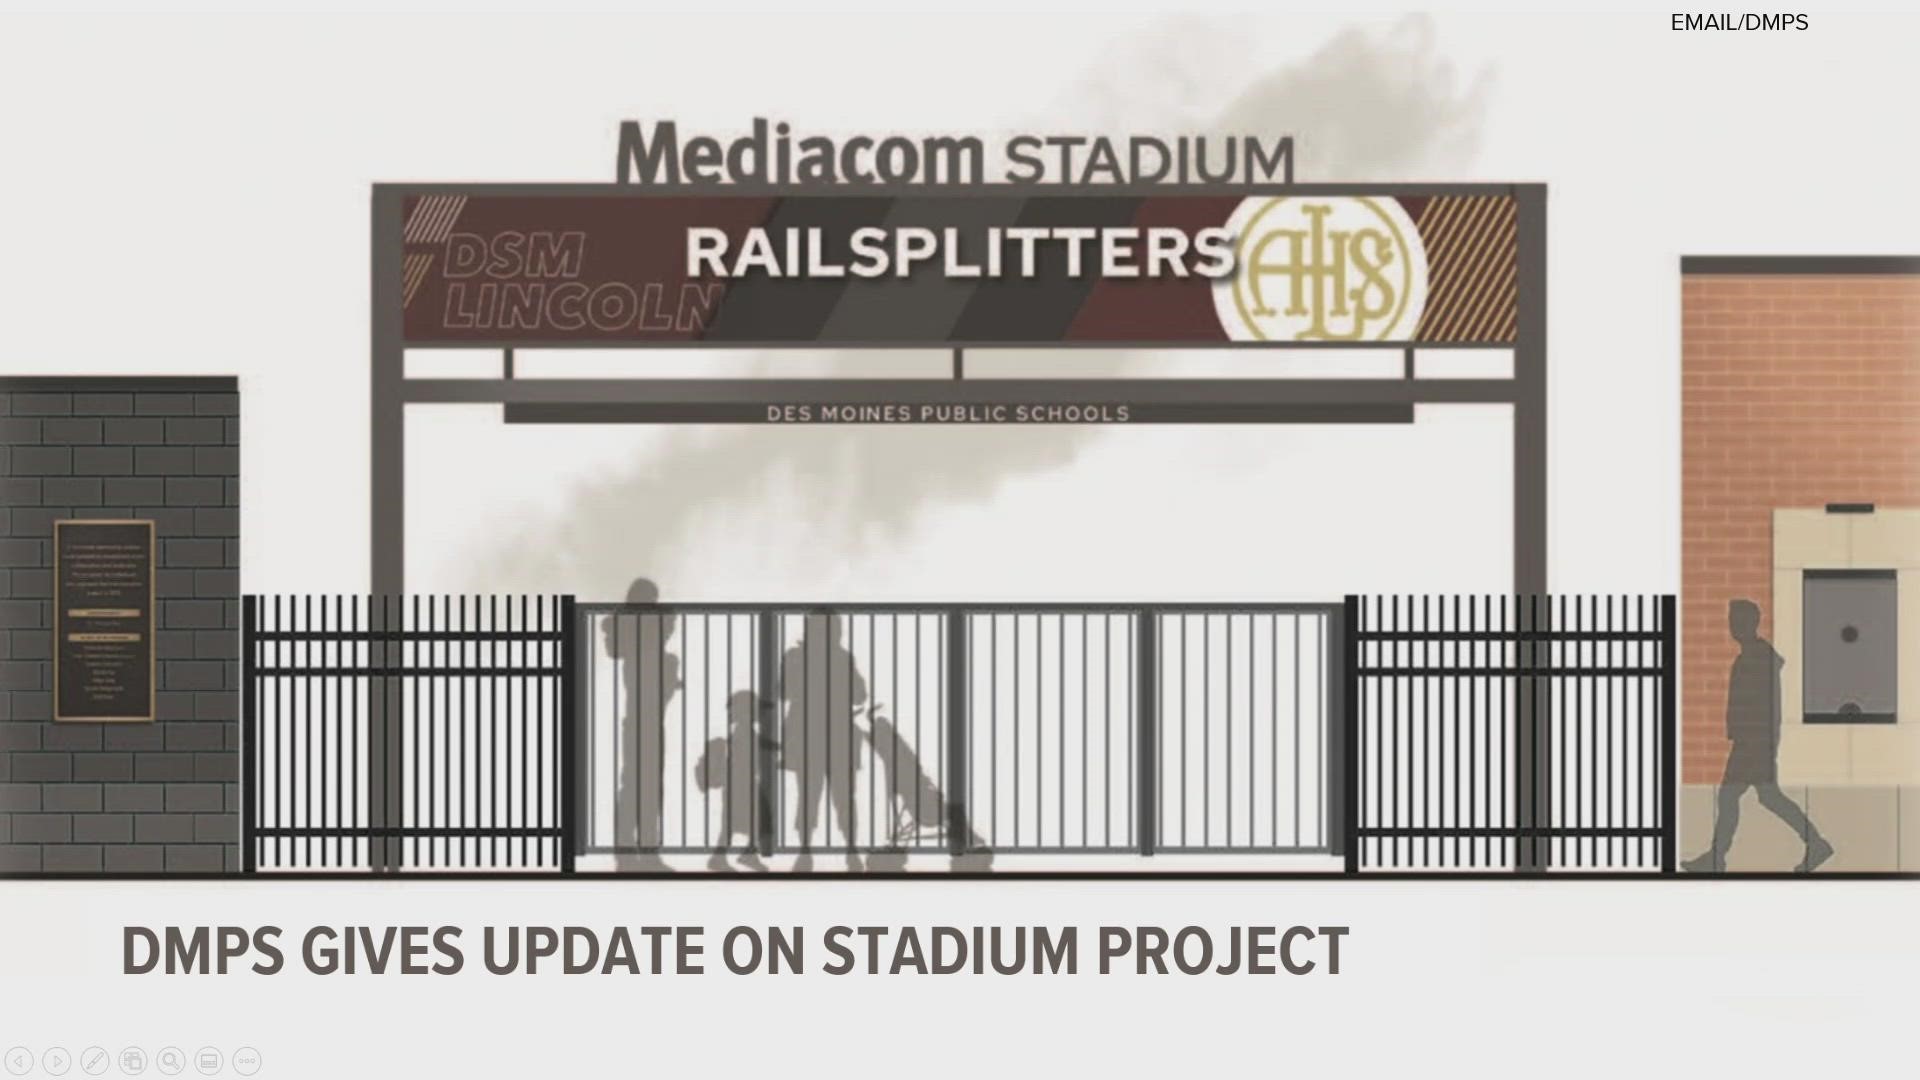 The Des Moines School Board revealed the 4,000-seat arena will be called the Mediacom Stadium. The project will cost upwards of $20 million.